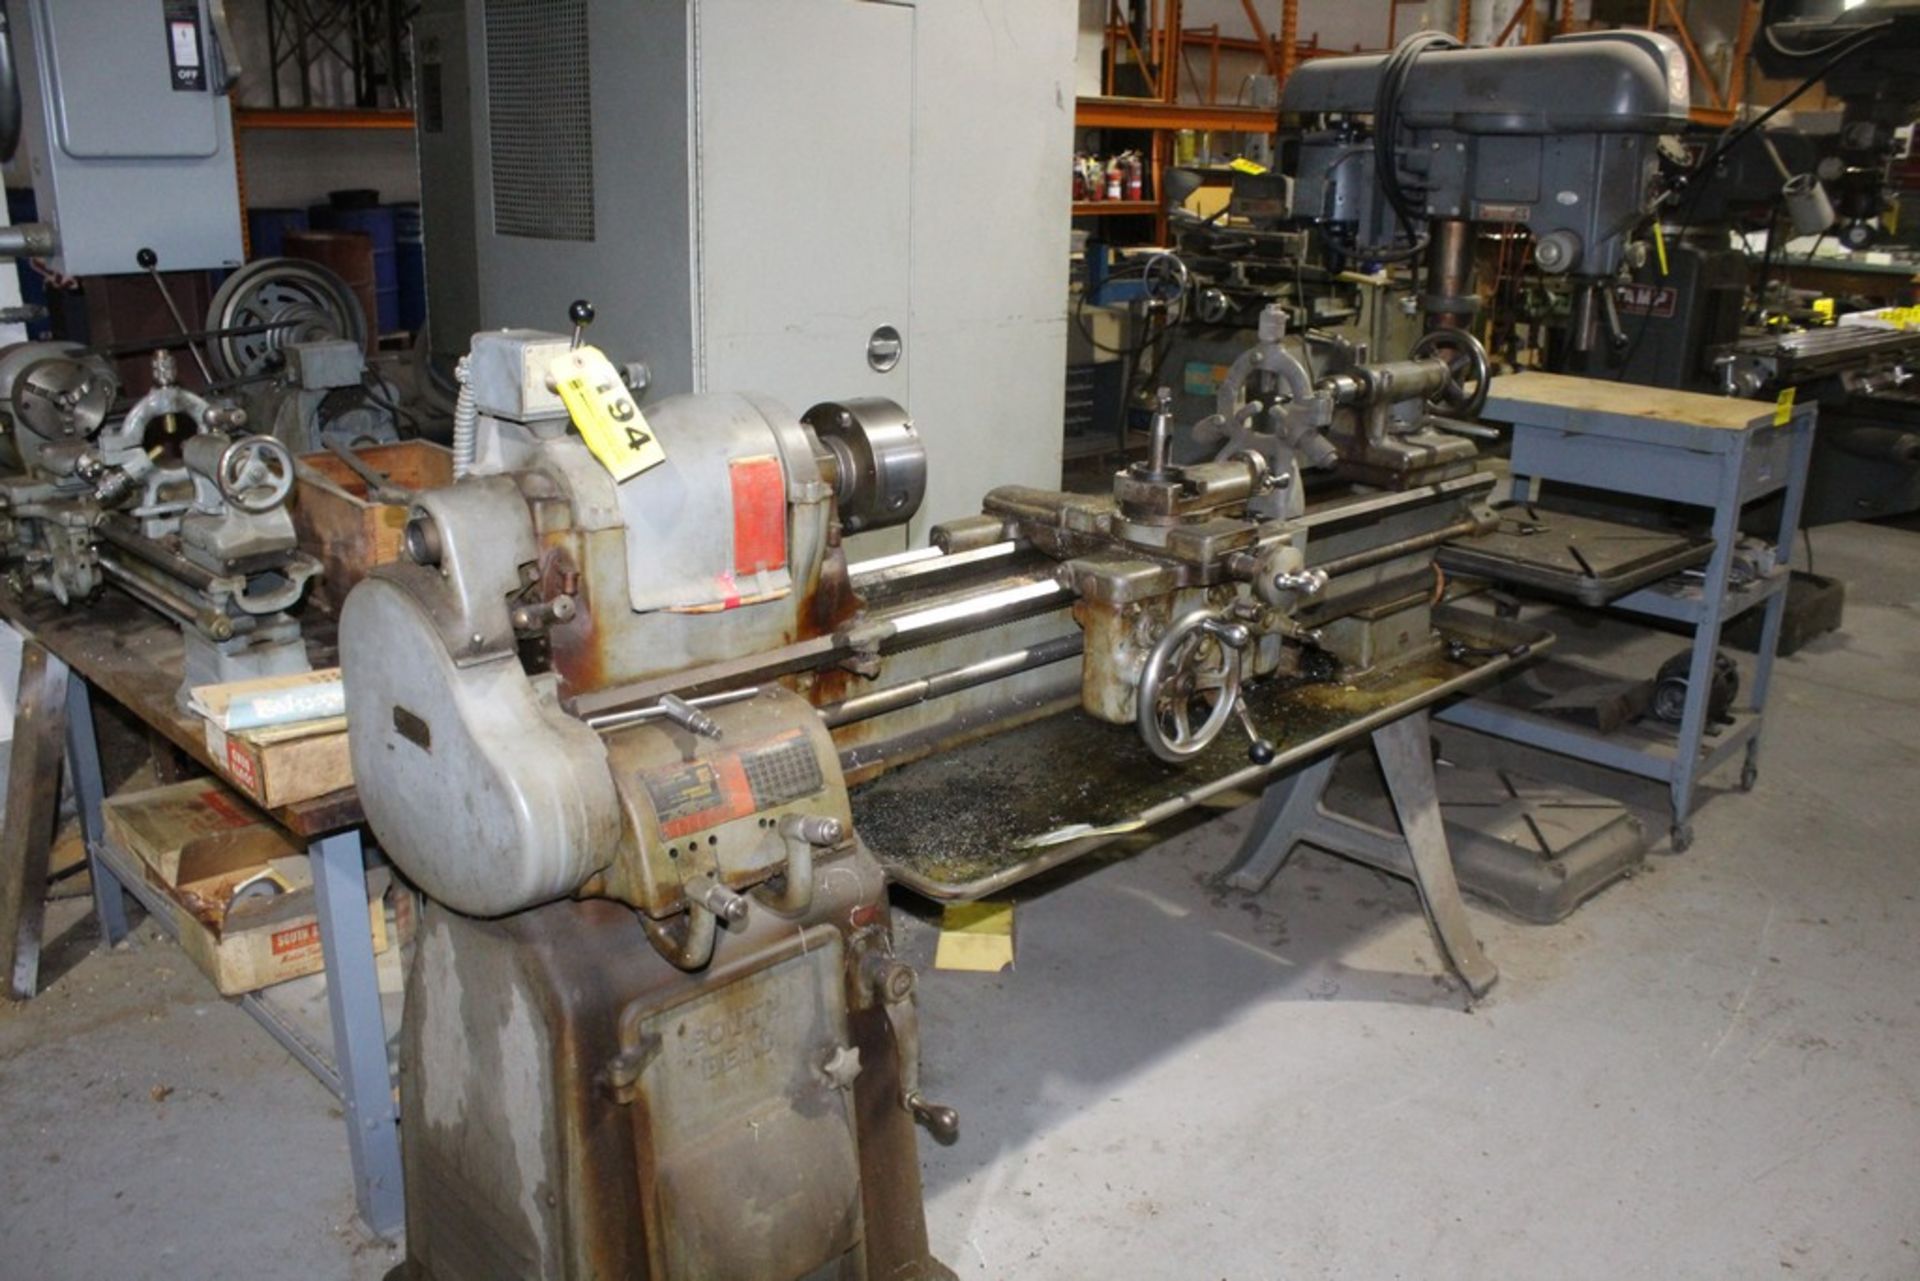 SOUTH BEND 14"X36" TOOLROOM LATHE S/N 11726TKX14 3 JAW CHUCK, STEADY REST AND FACEPLATE, INCH - Image 2 of 6